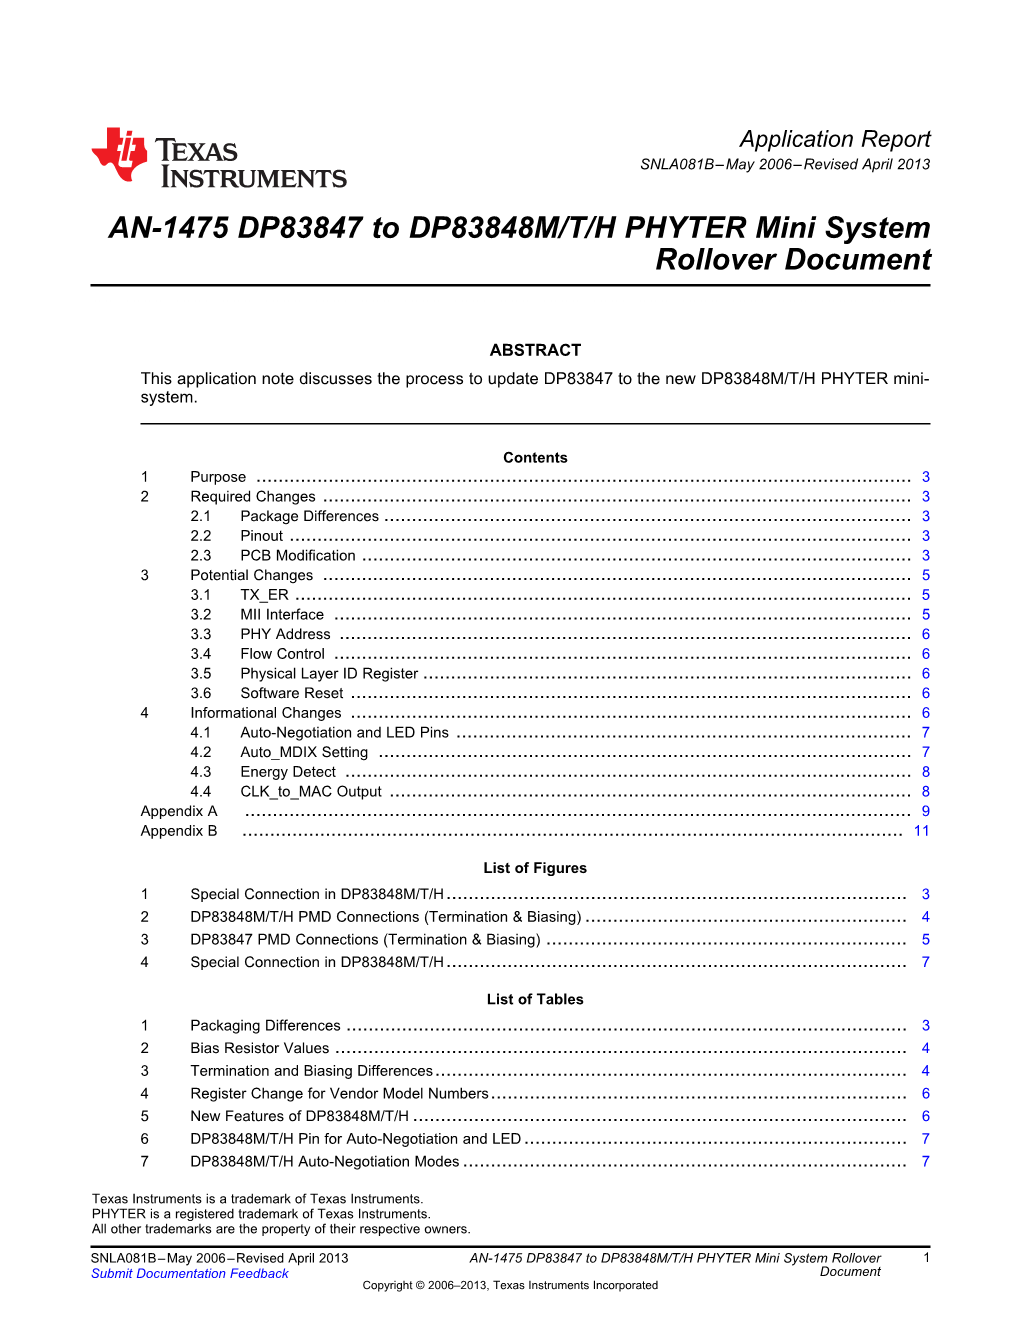 DP83847 to DP83848M/T/H PHYTER Mini System Rollover Document